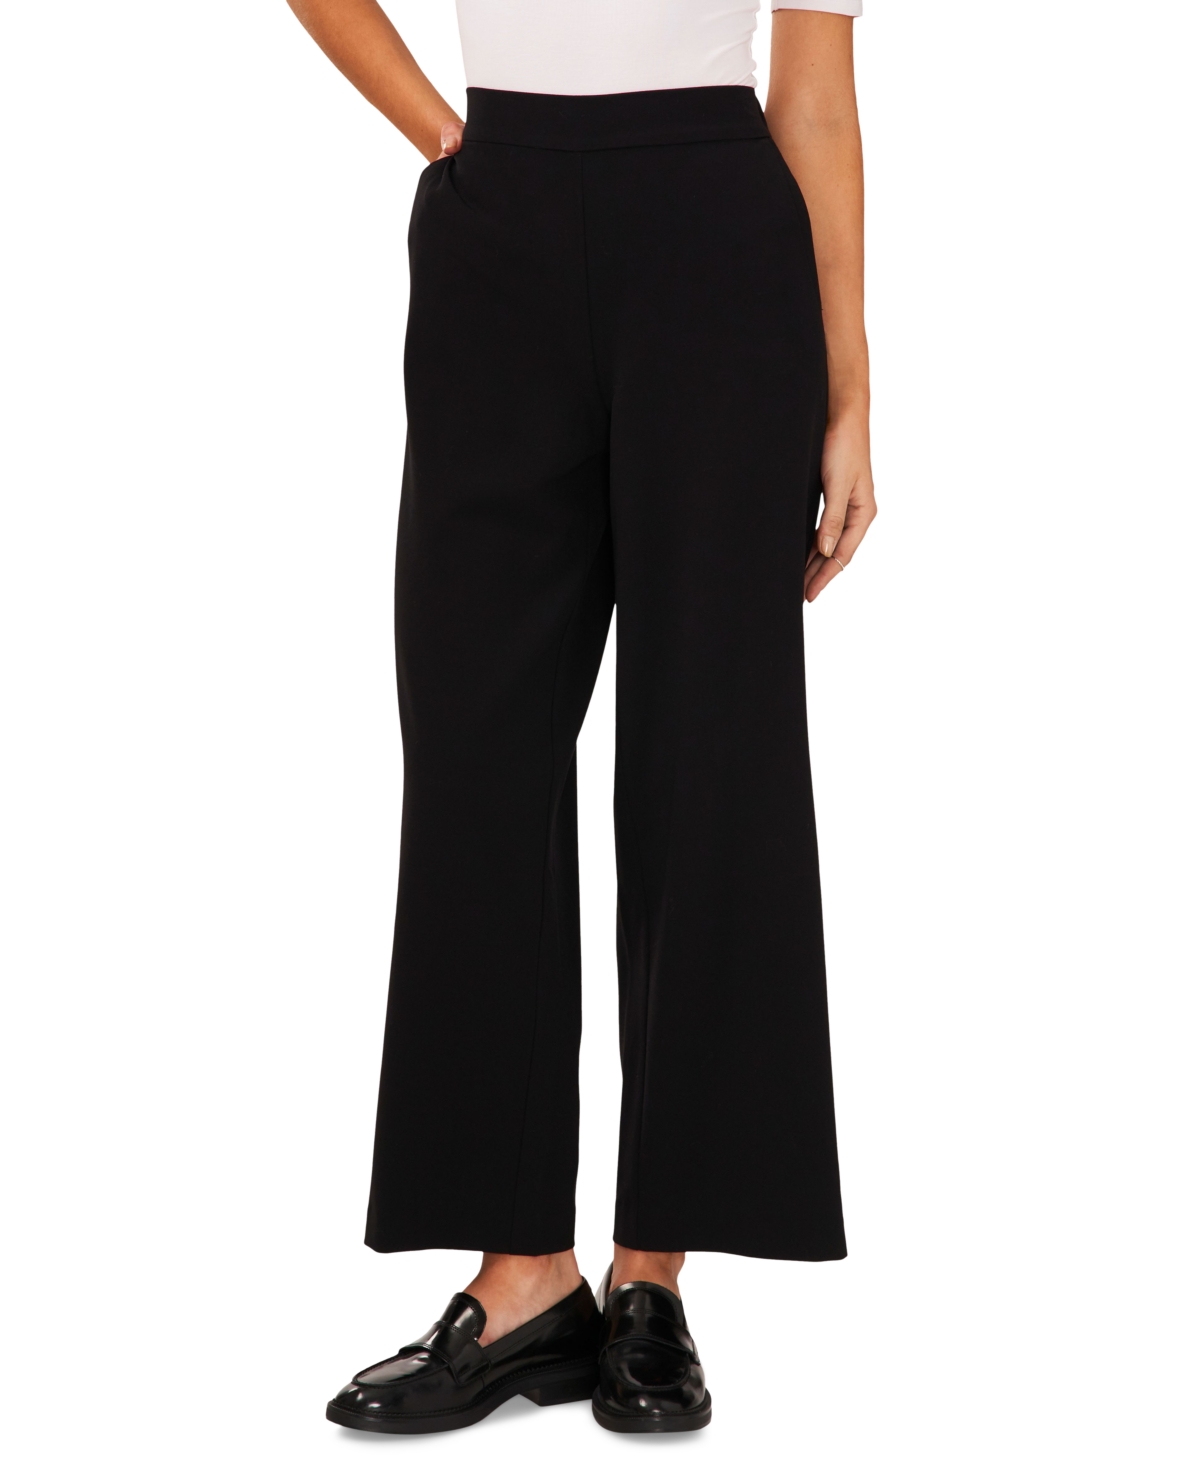 VINCE CAMUTO WOMEN'S WIDE LEG PULL-ON PANTS